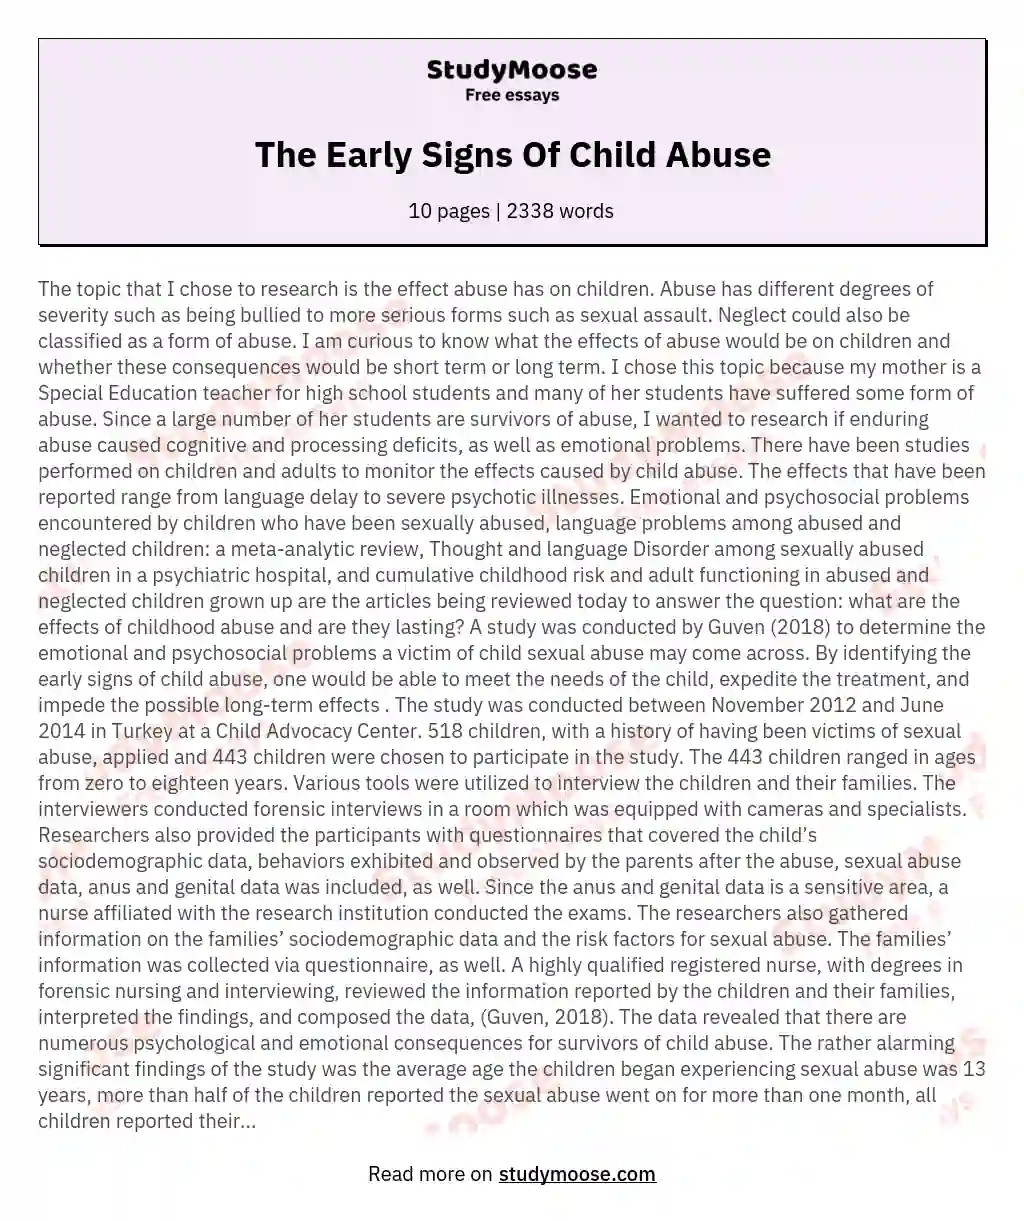 The Early Signs Of Child Abuse essay